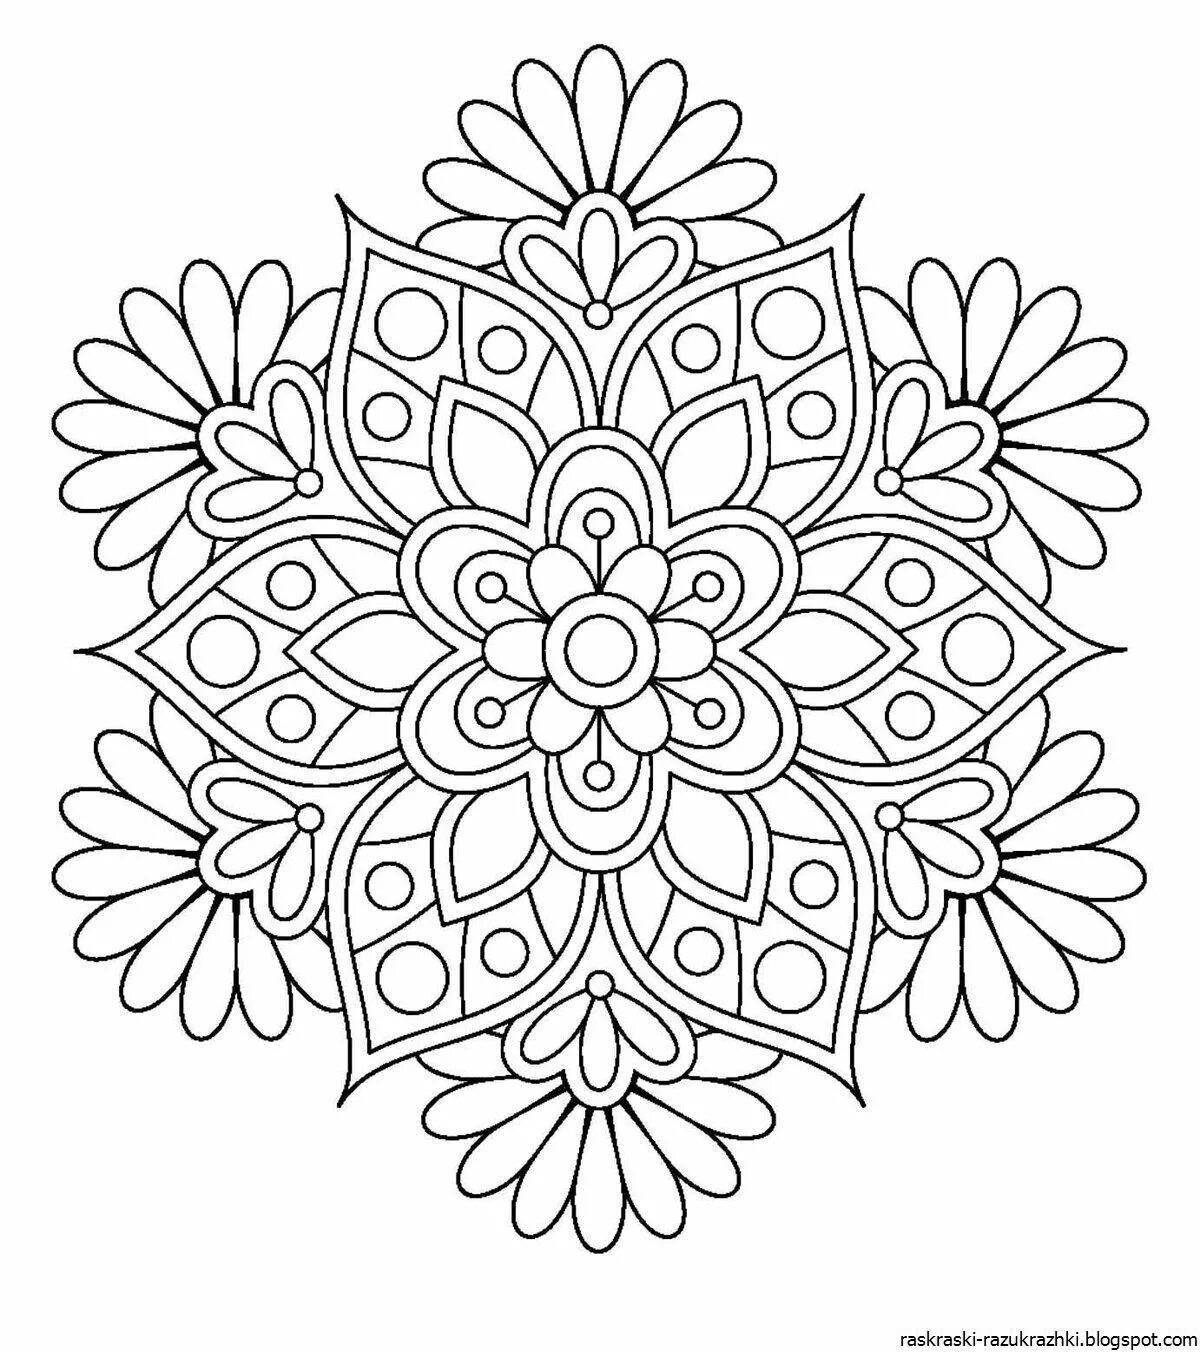 Adorable coloring book for beginners